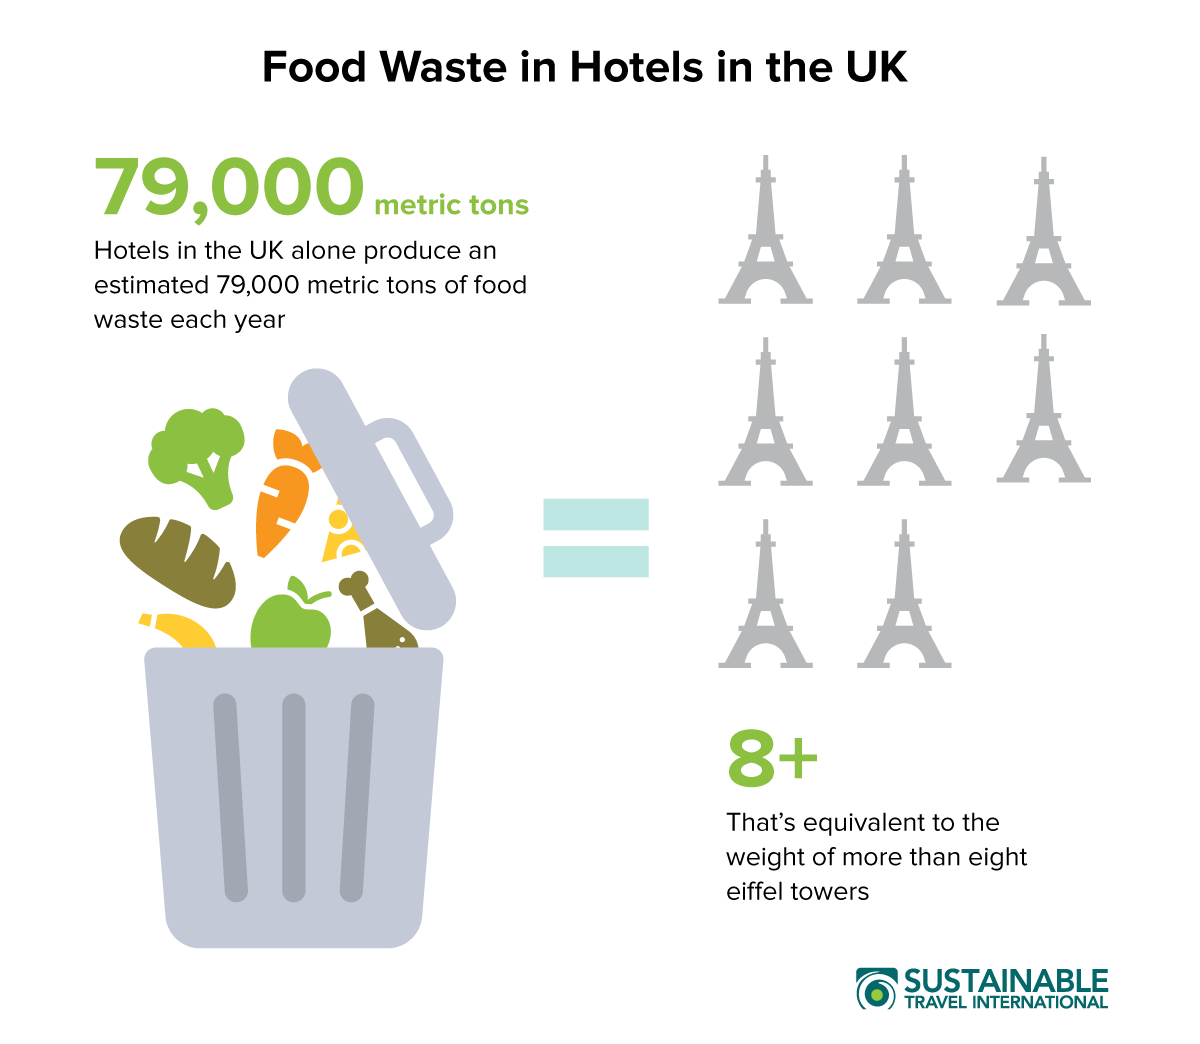 Hotel food waste in the UK